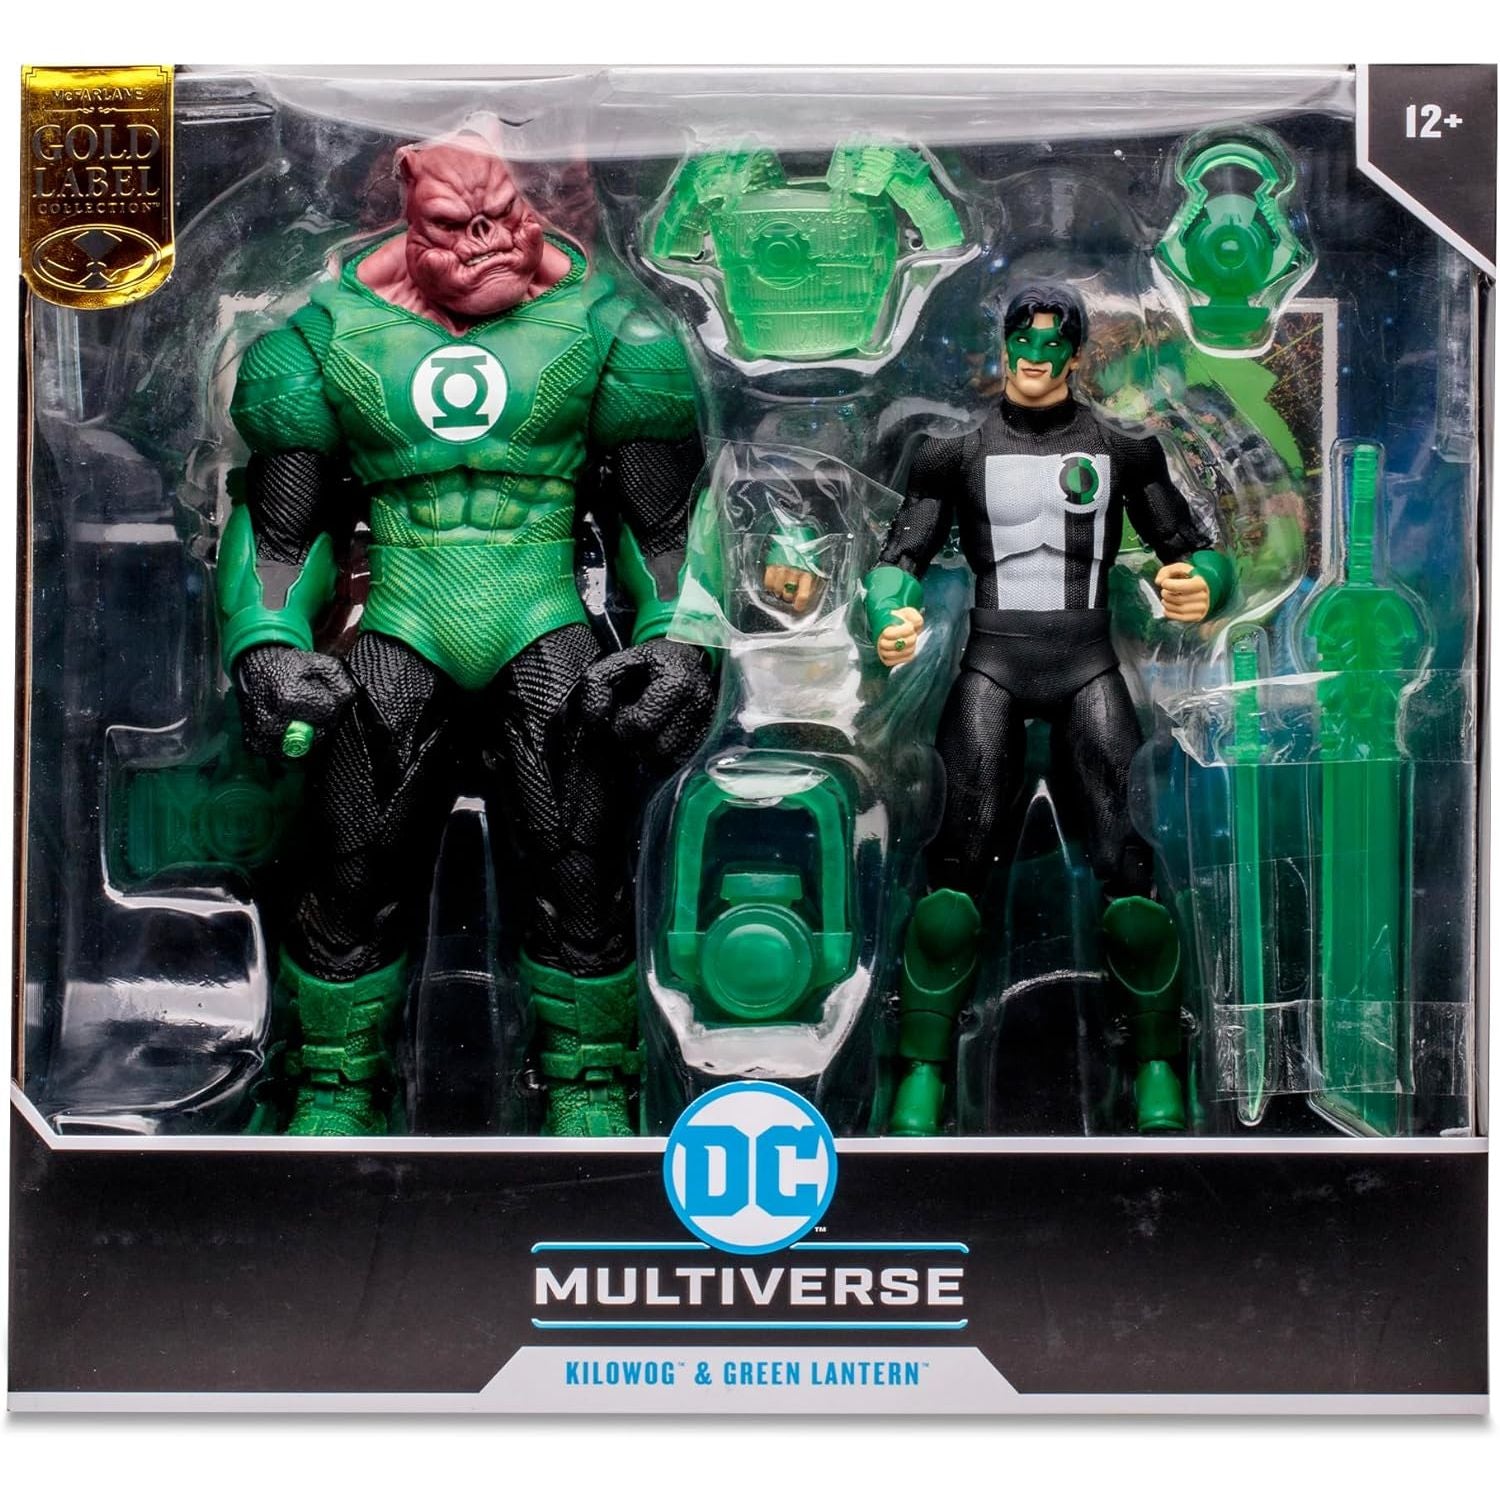 DC Multiverse 7IN with MEGAFIG 2PK - KILOWOG with Kyle Rayner Green Lantern (Gold Label)